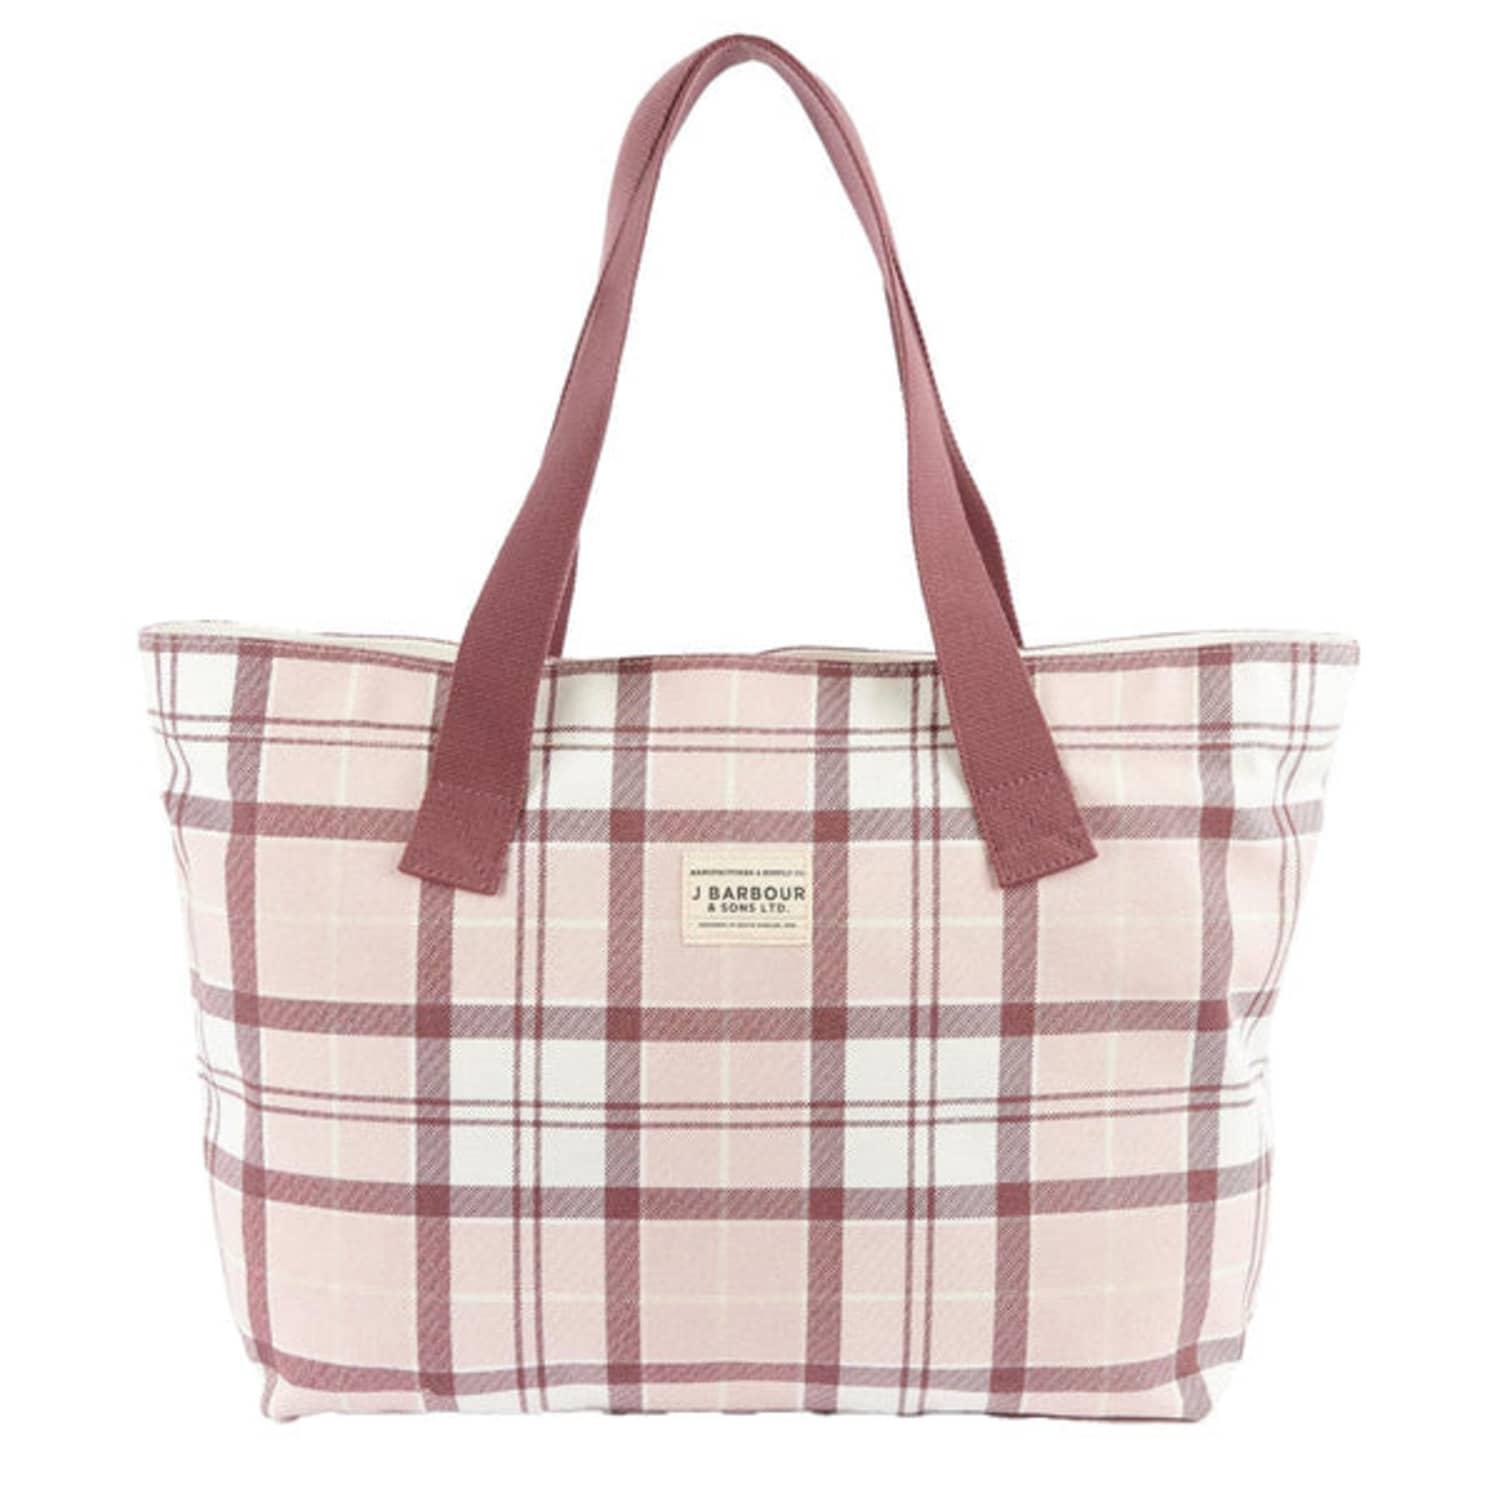 Barbour Printed Shopper | Lyst